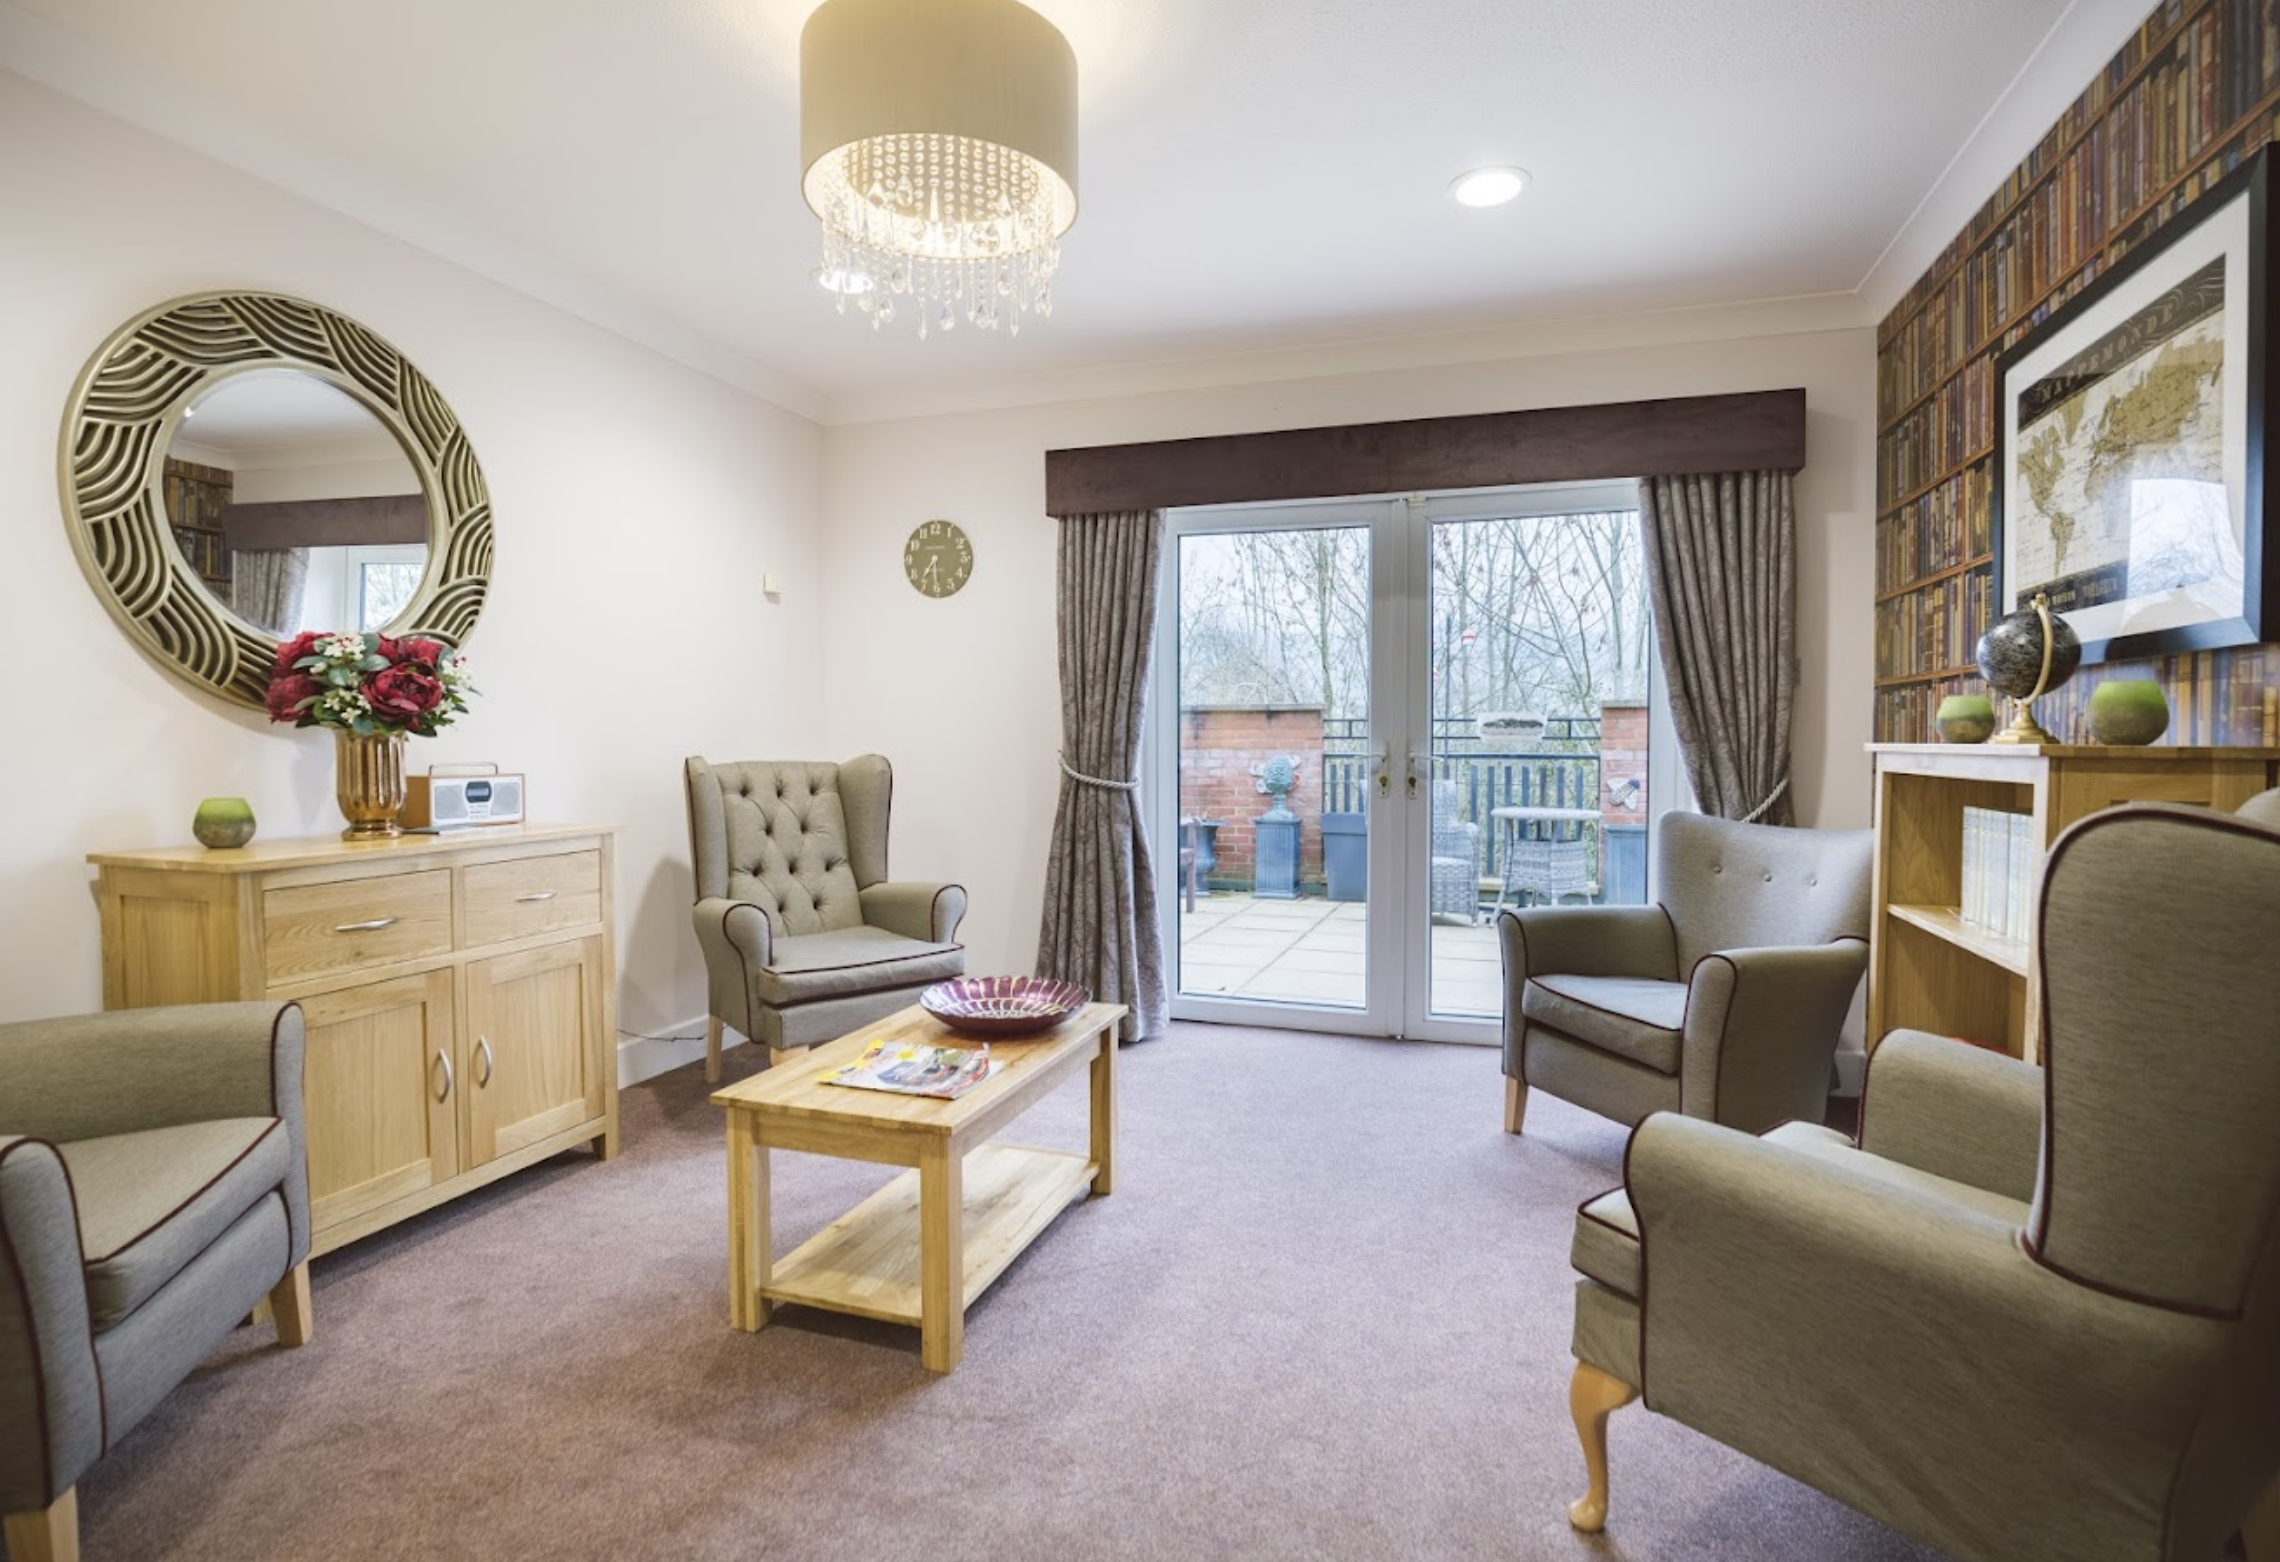 Lounge of The Rhallt care home in Welshpool, Wales